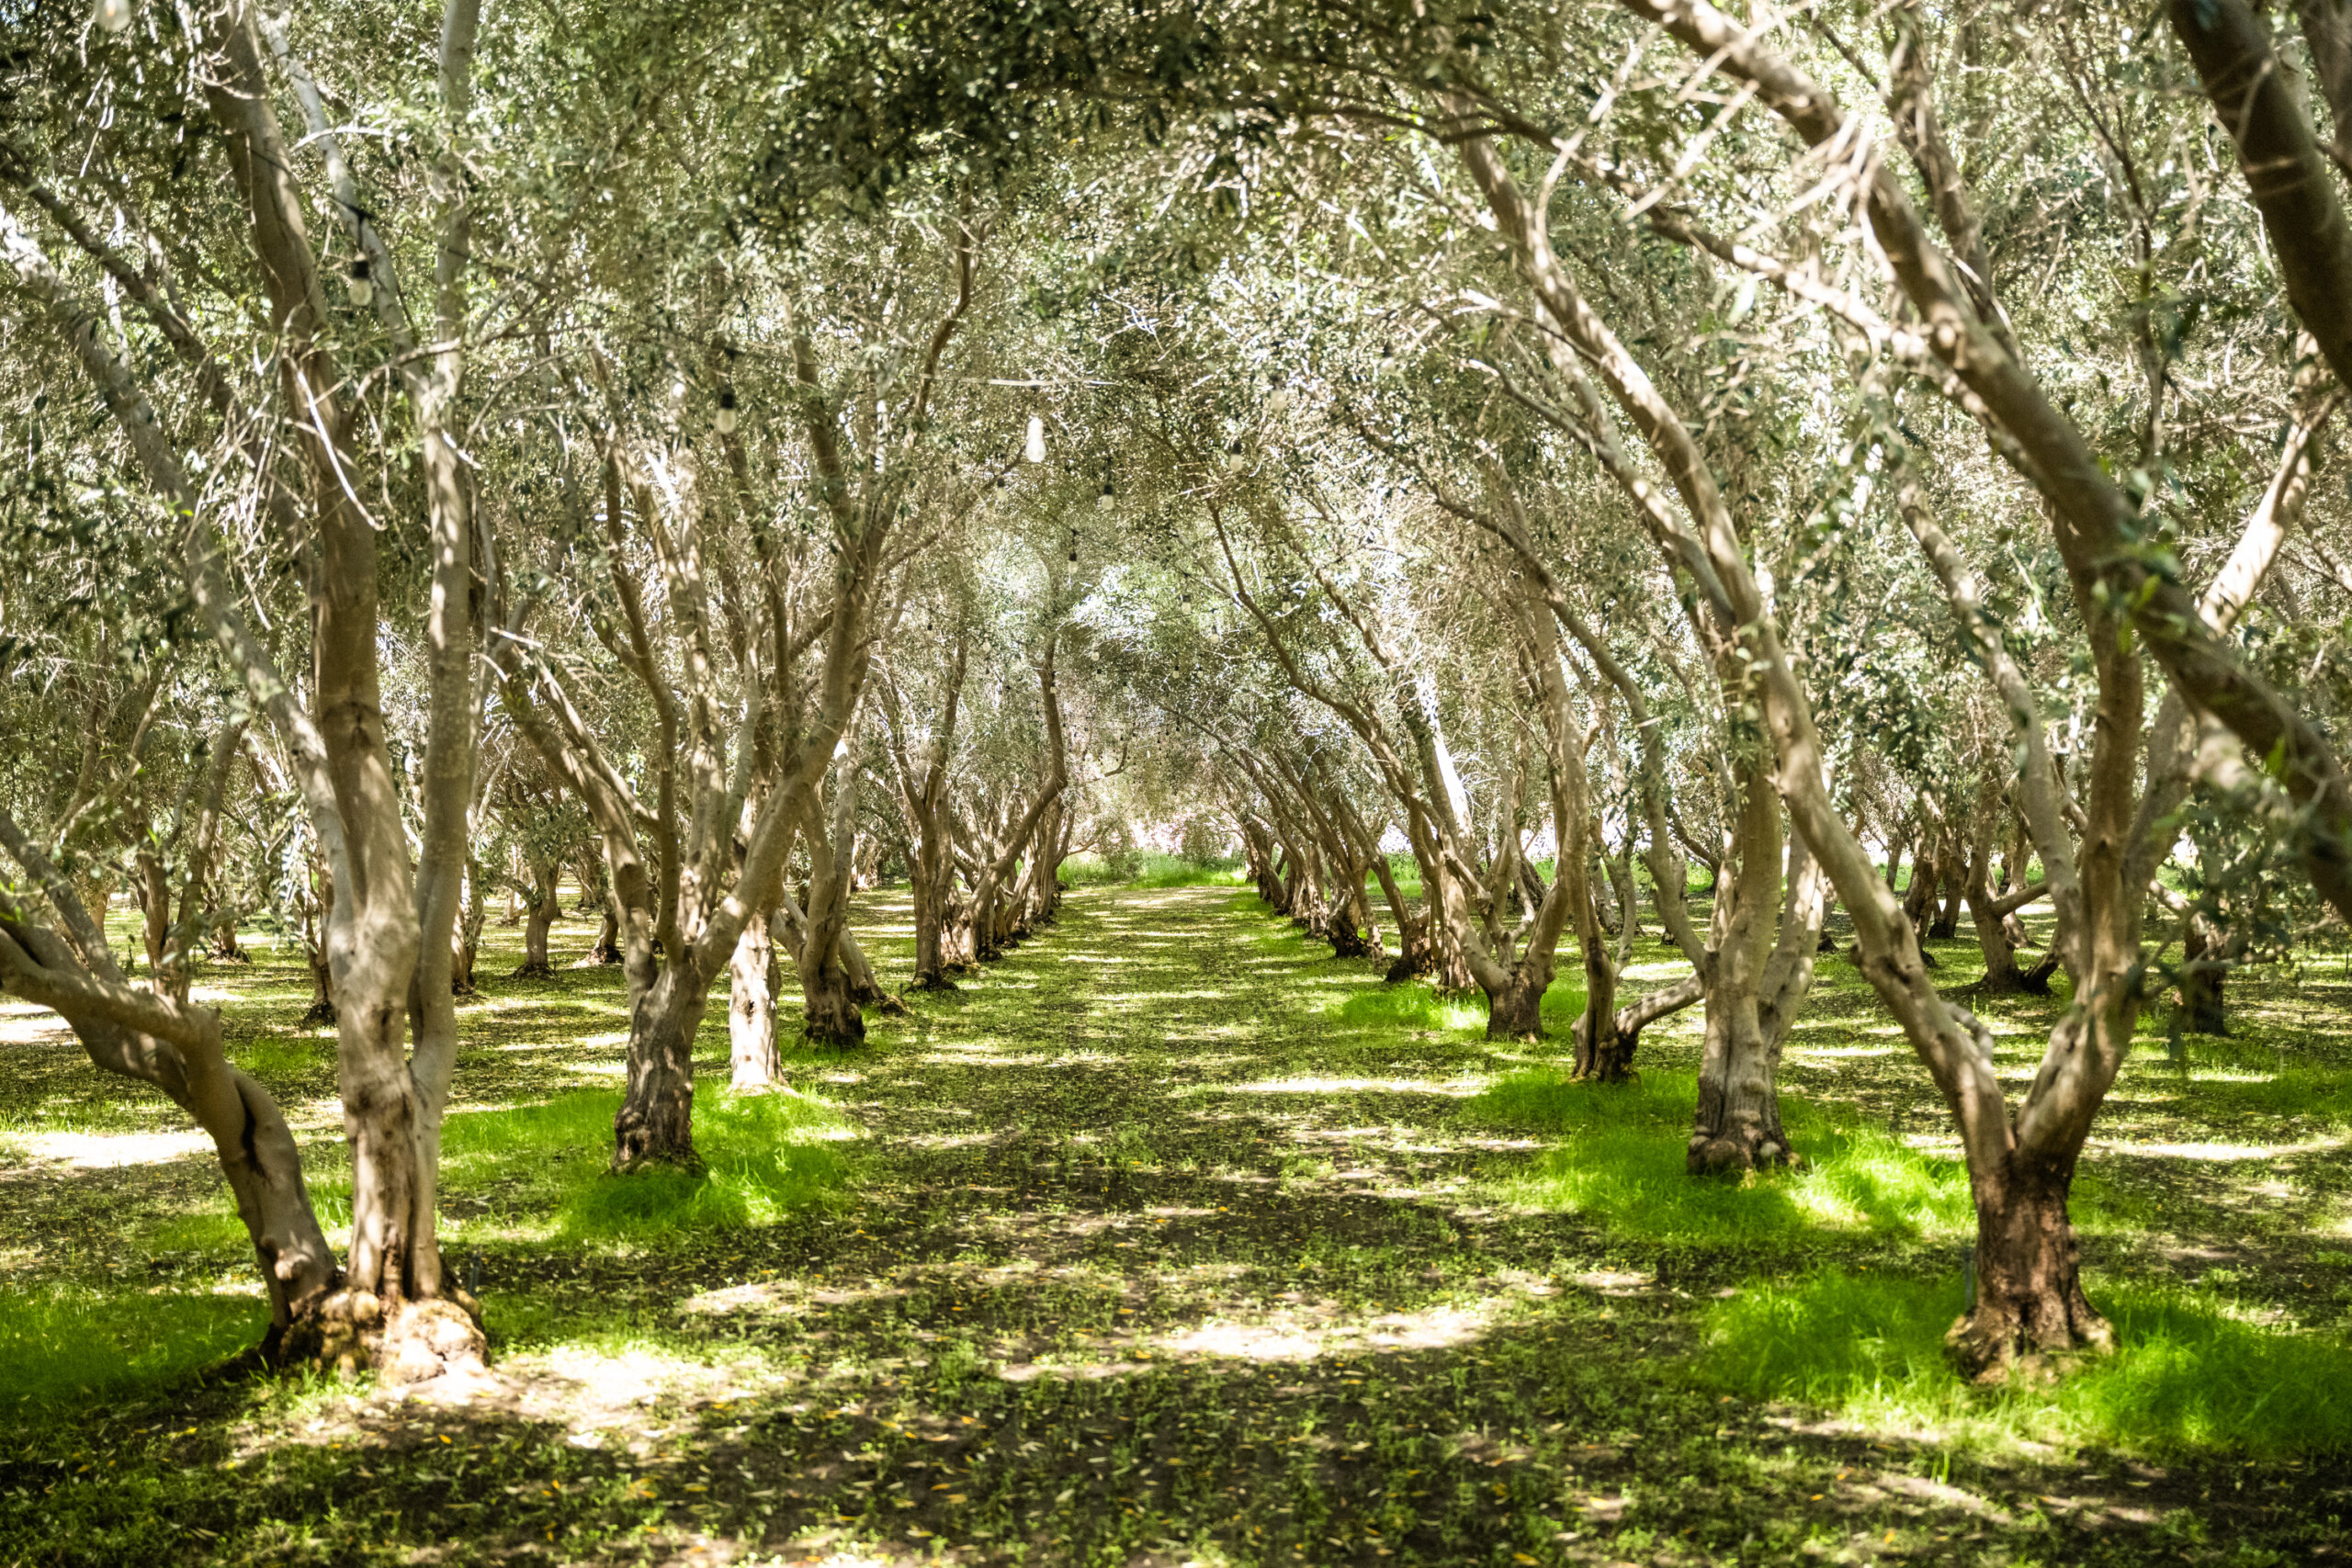 Inside the grove, under the canopy of the trees at Temecula Olive Oil Co